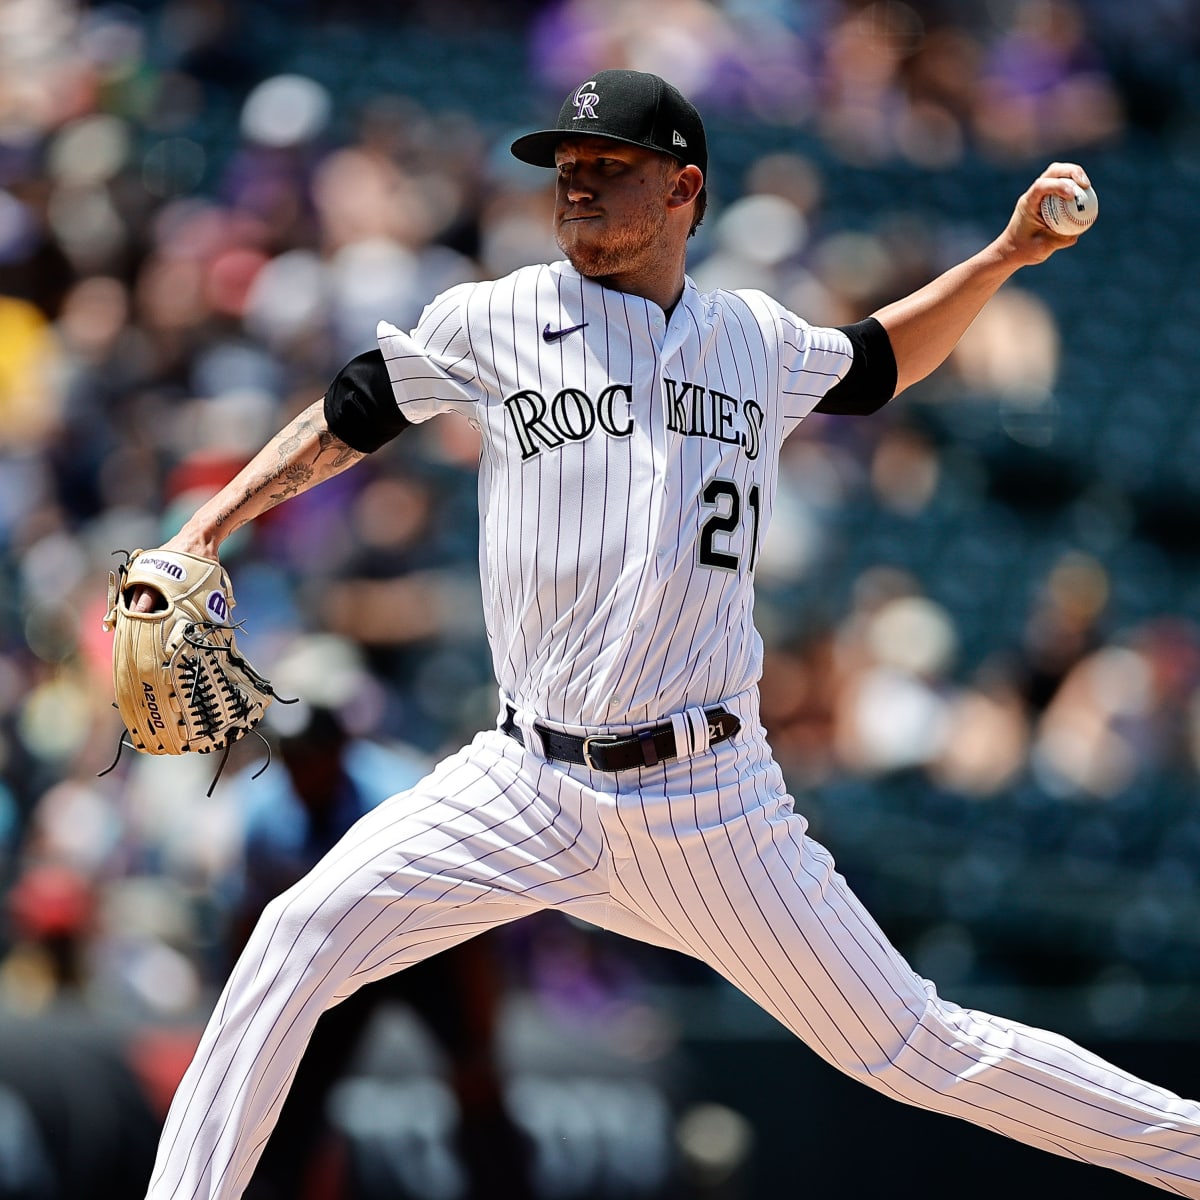 Rockies spring training report: Kyle Freeland says “we can't